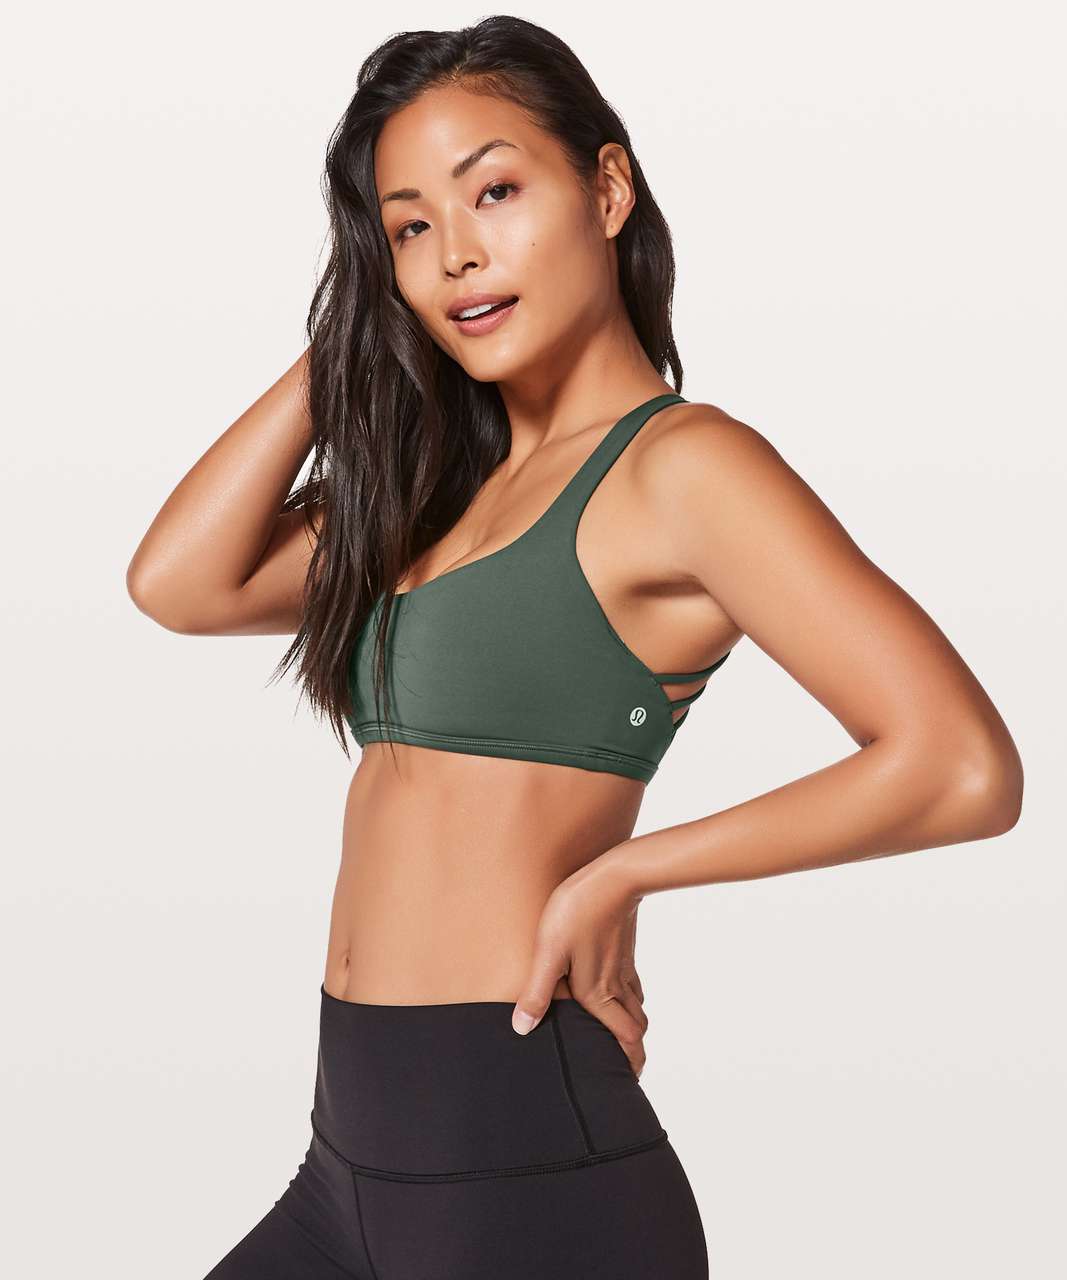 lululemon - Colour Alert–the Free to Be Bra Wild just dropped in